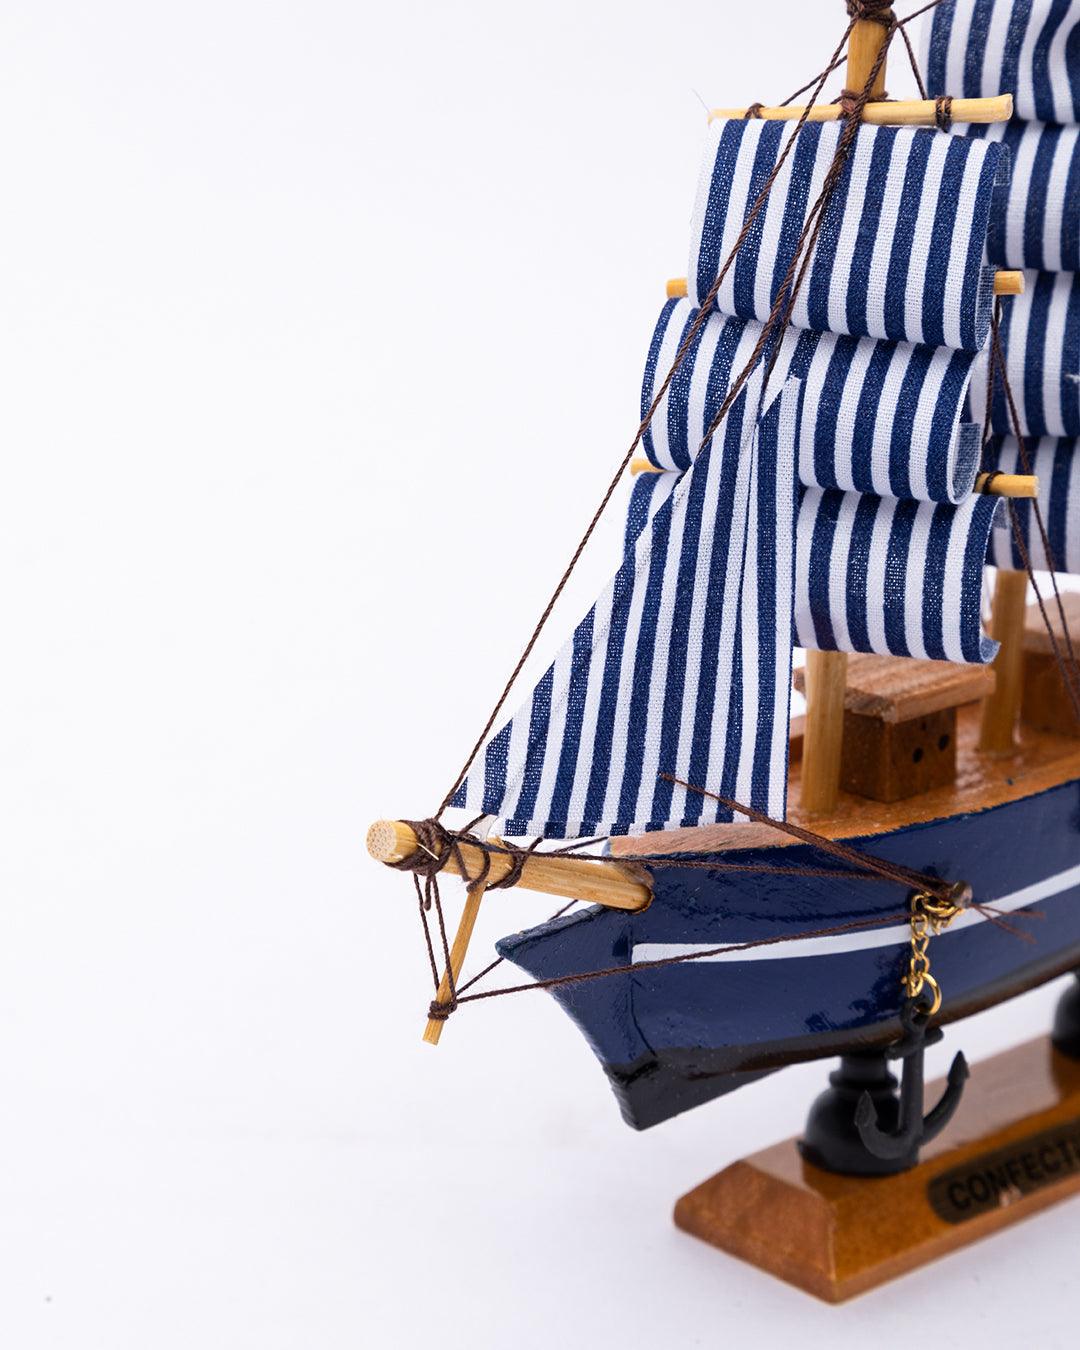 Decorative Boat, Handcrafted Wood, For Home & Office Décor, Antique Finish, Blue, Wood - MARKET 99